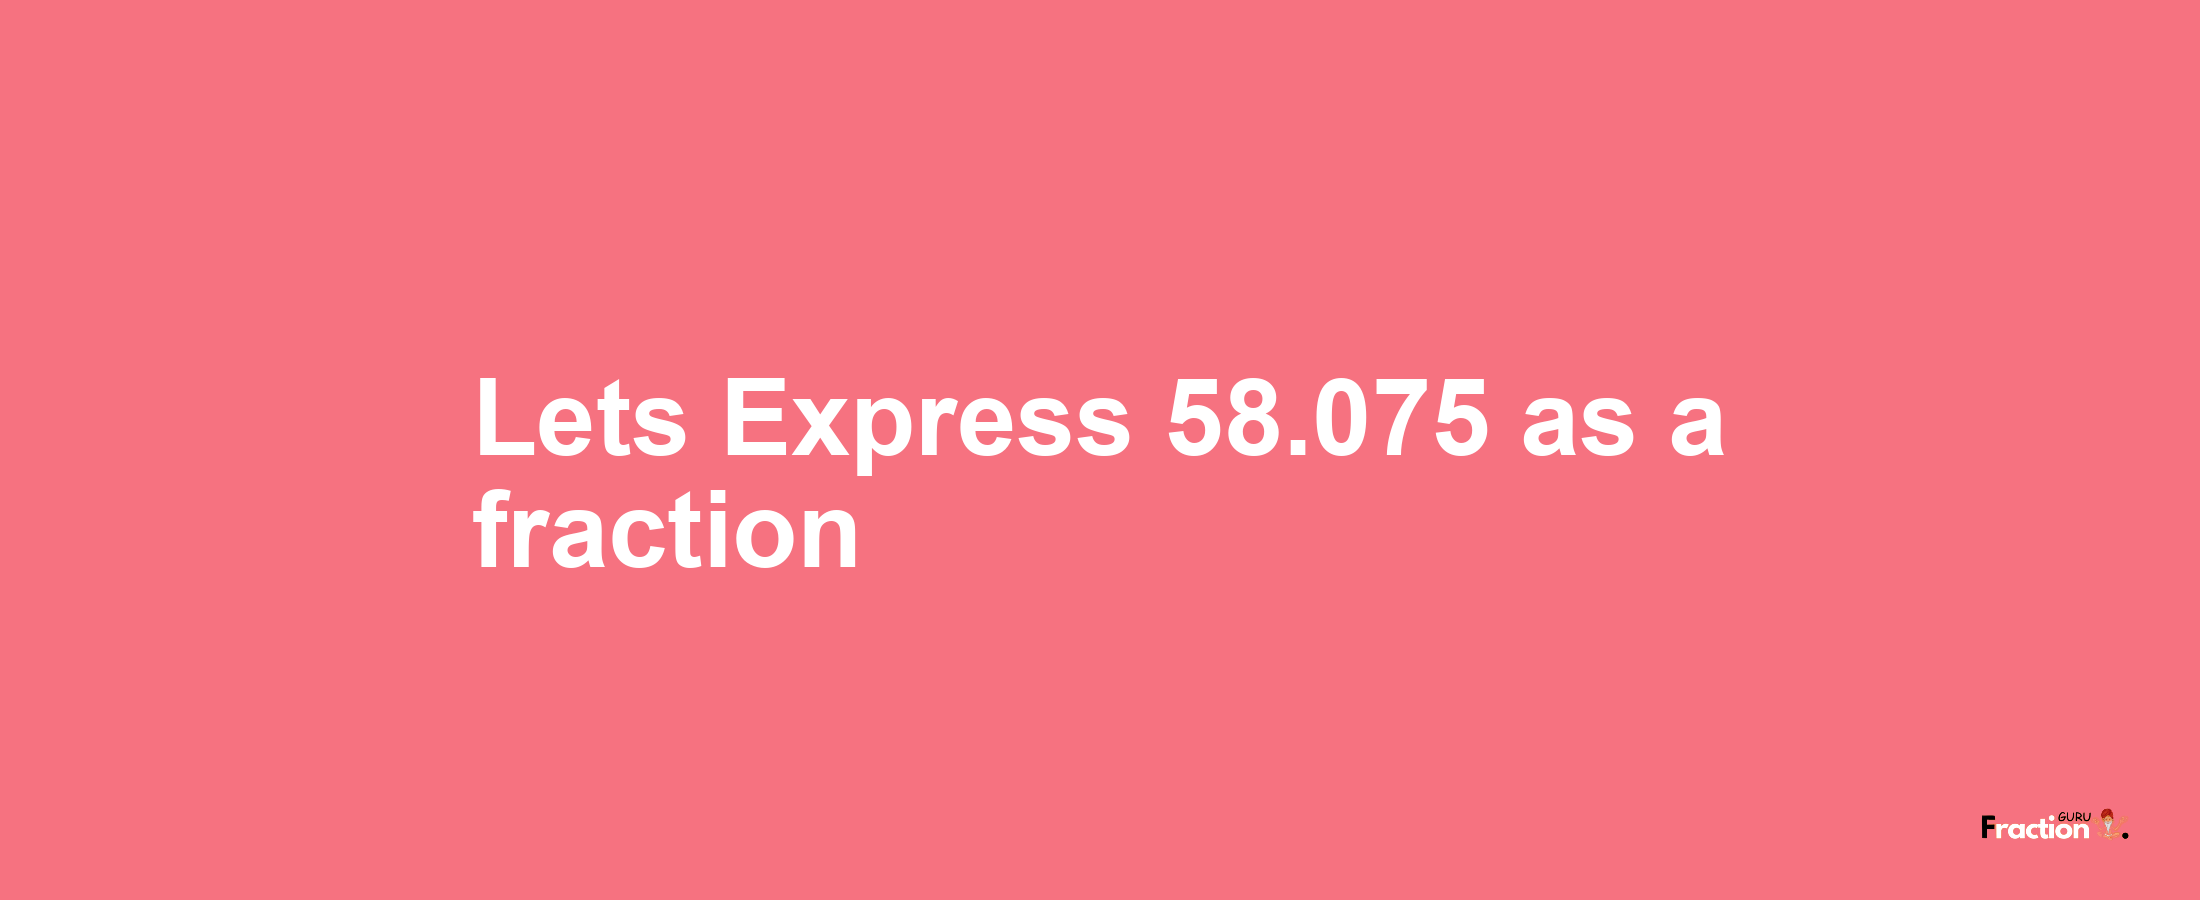 Lets Express 58.075 as afraction